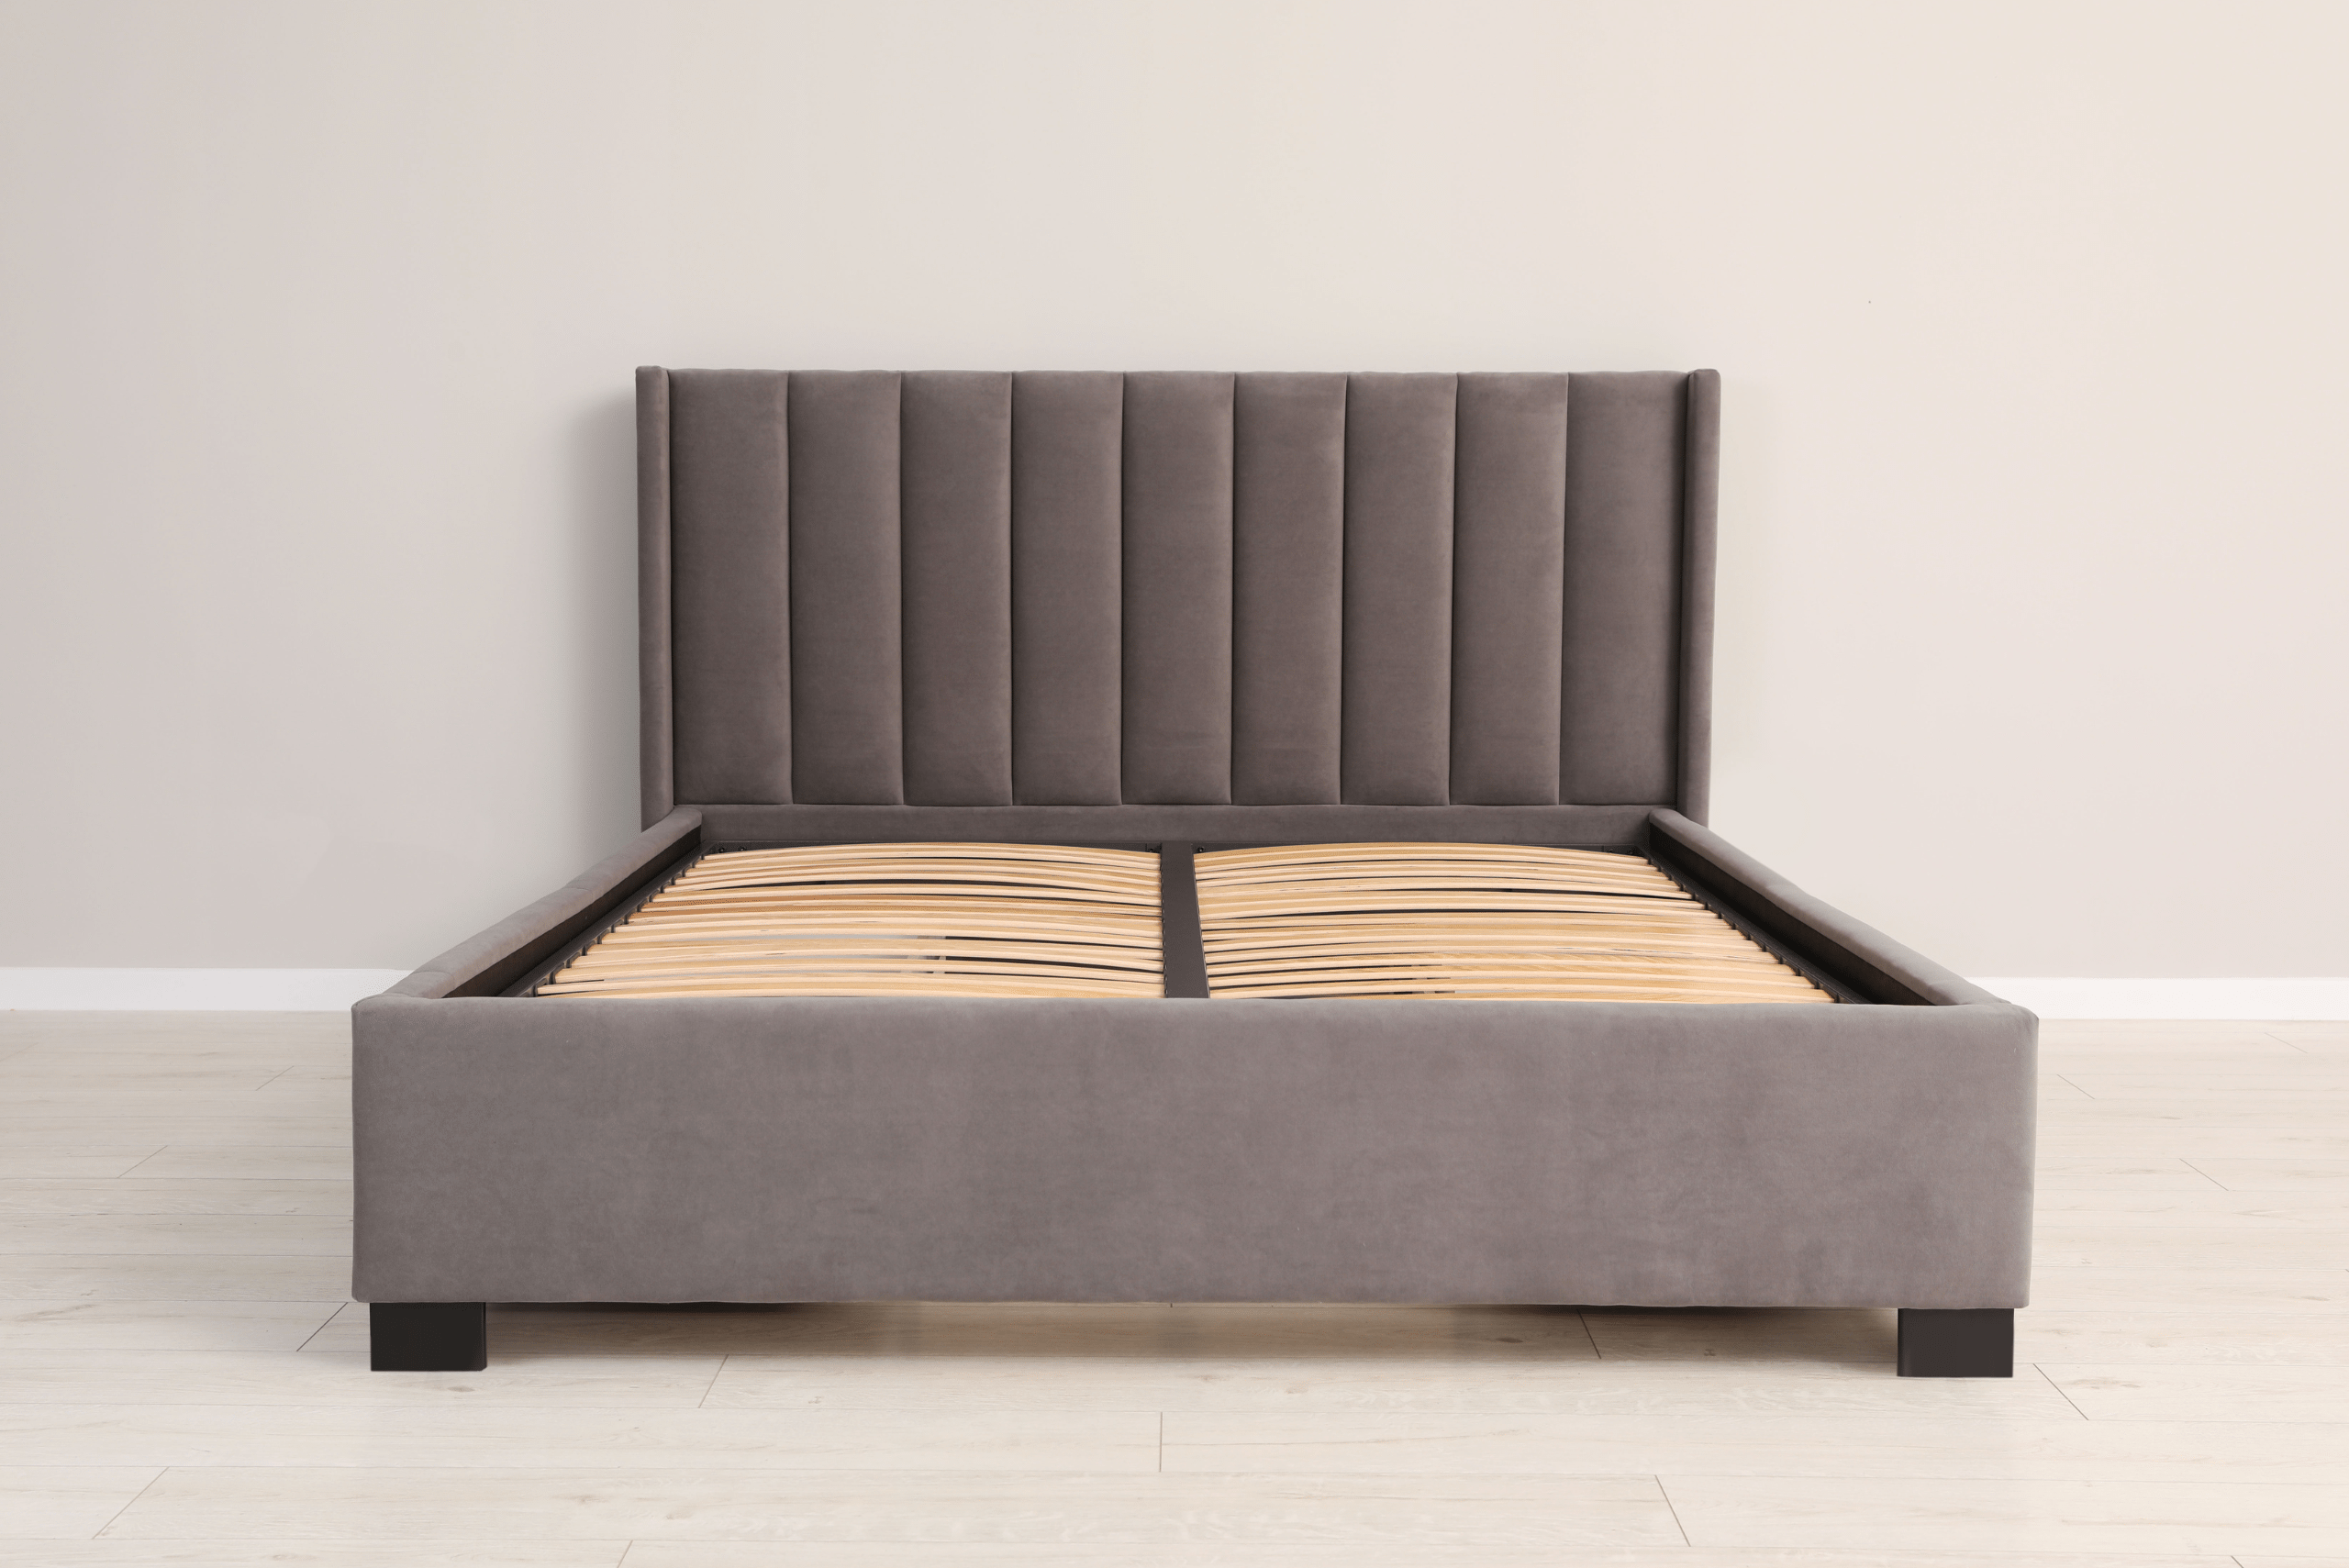 Assembled bed frame with grey fabric finish.